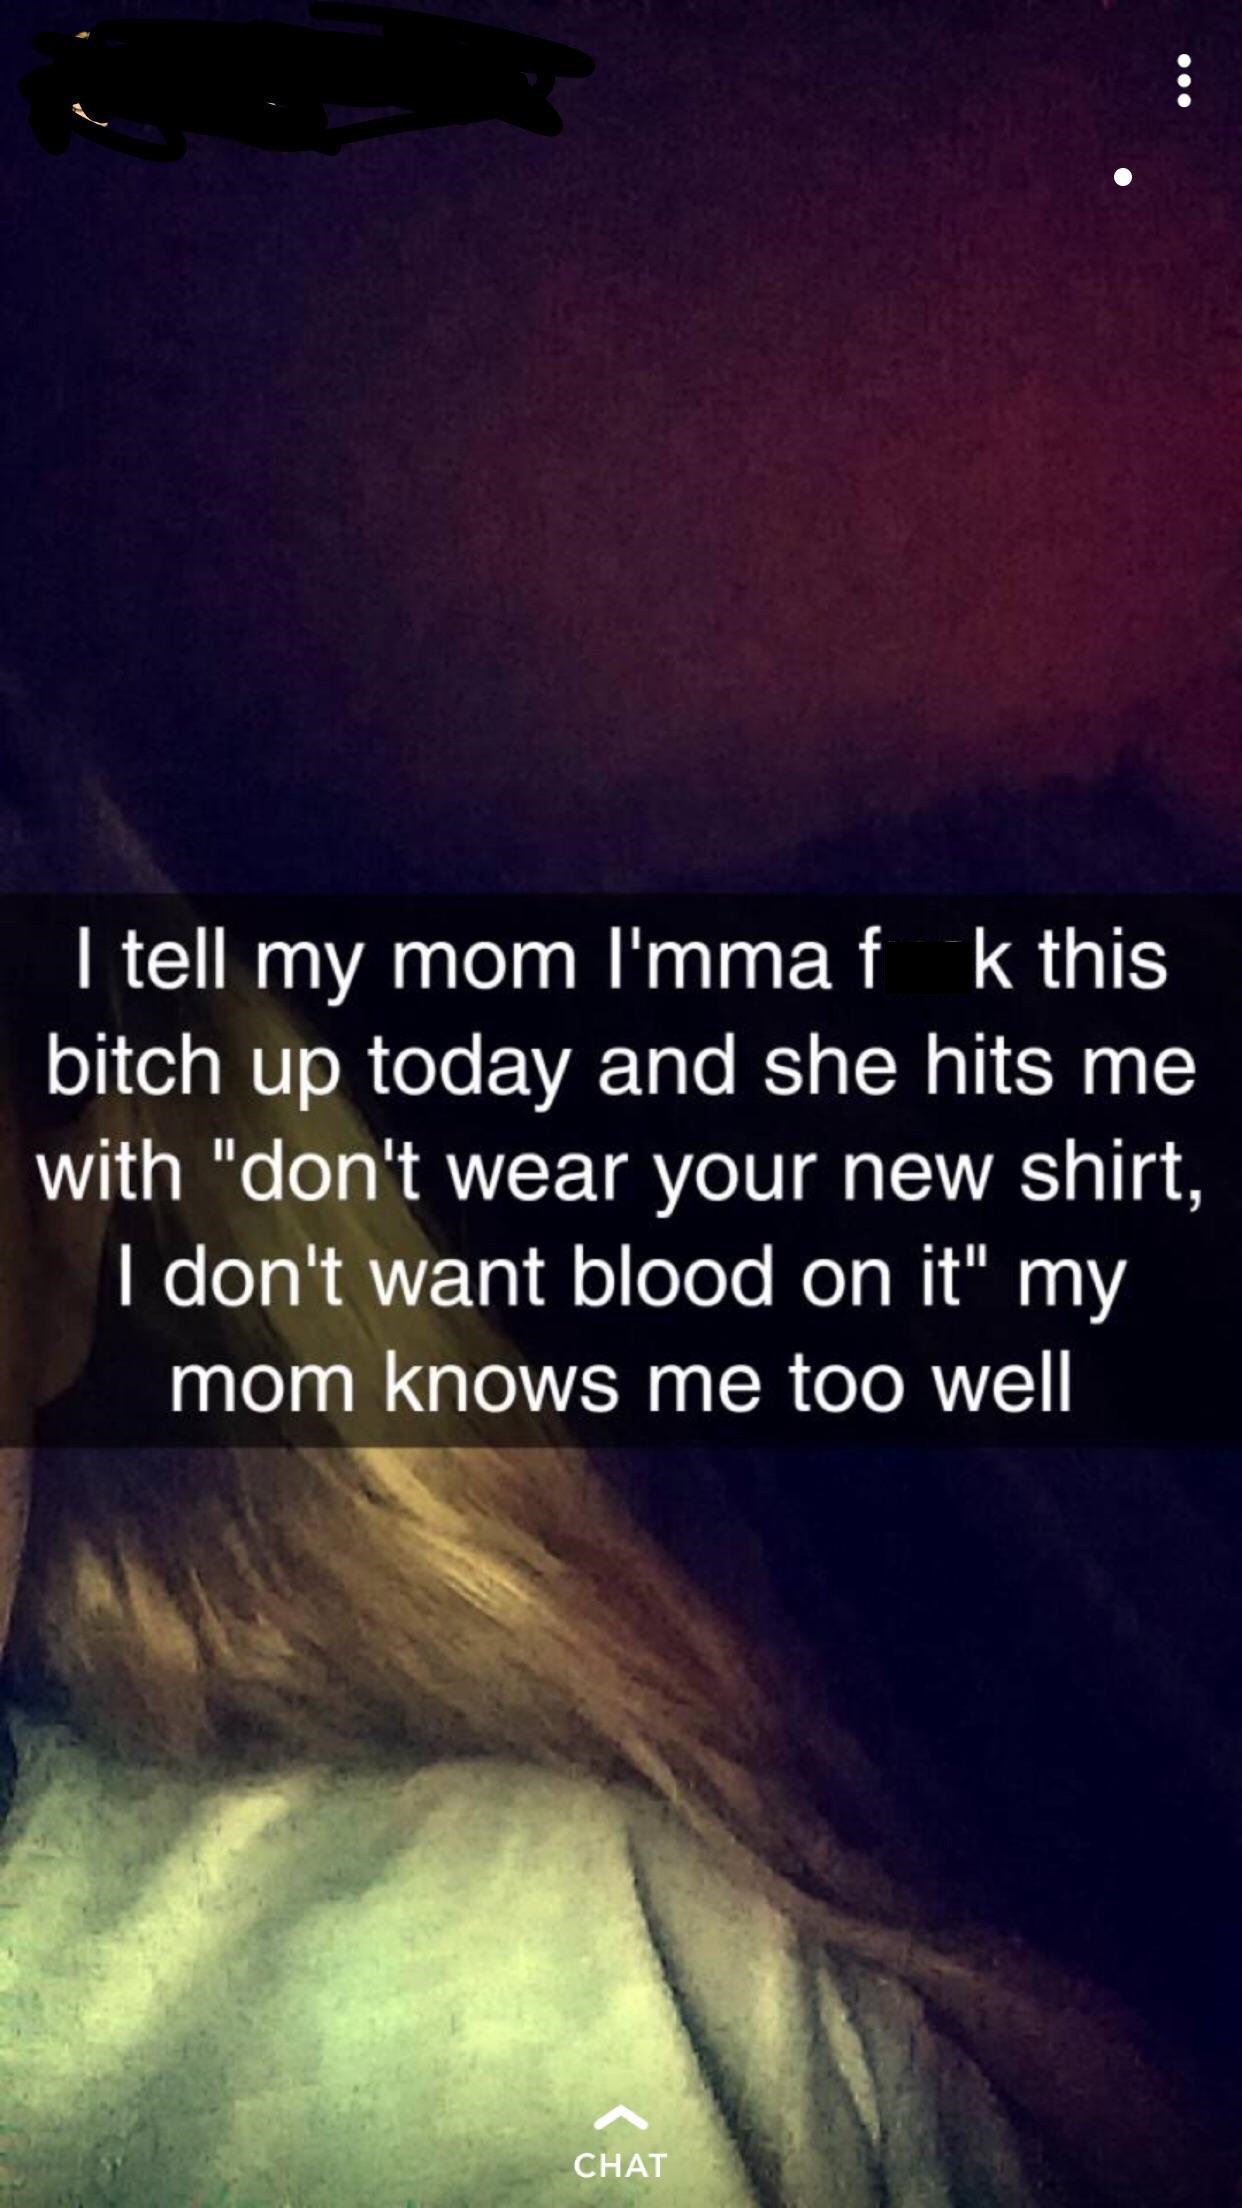 eminem beautiful lyrics - I tell my mom I'mma f k this bitch up today and she hits me with "don't wear your new shirt, I don't want blood on it" my mom knows me too well Chat